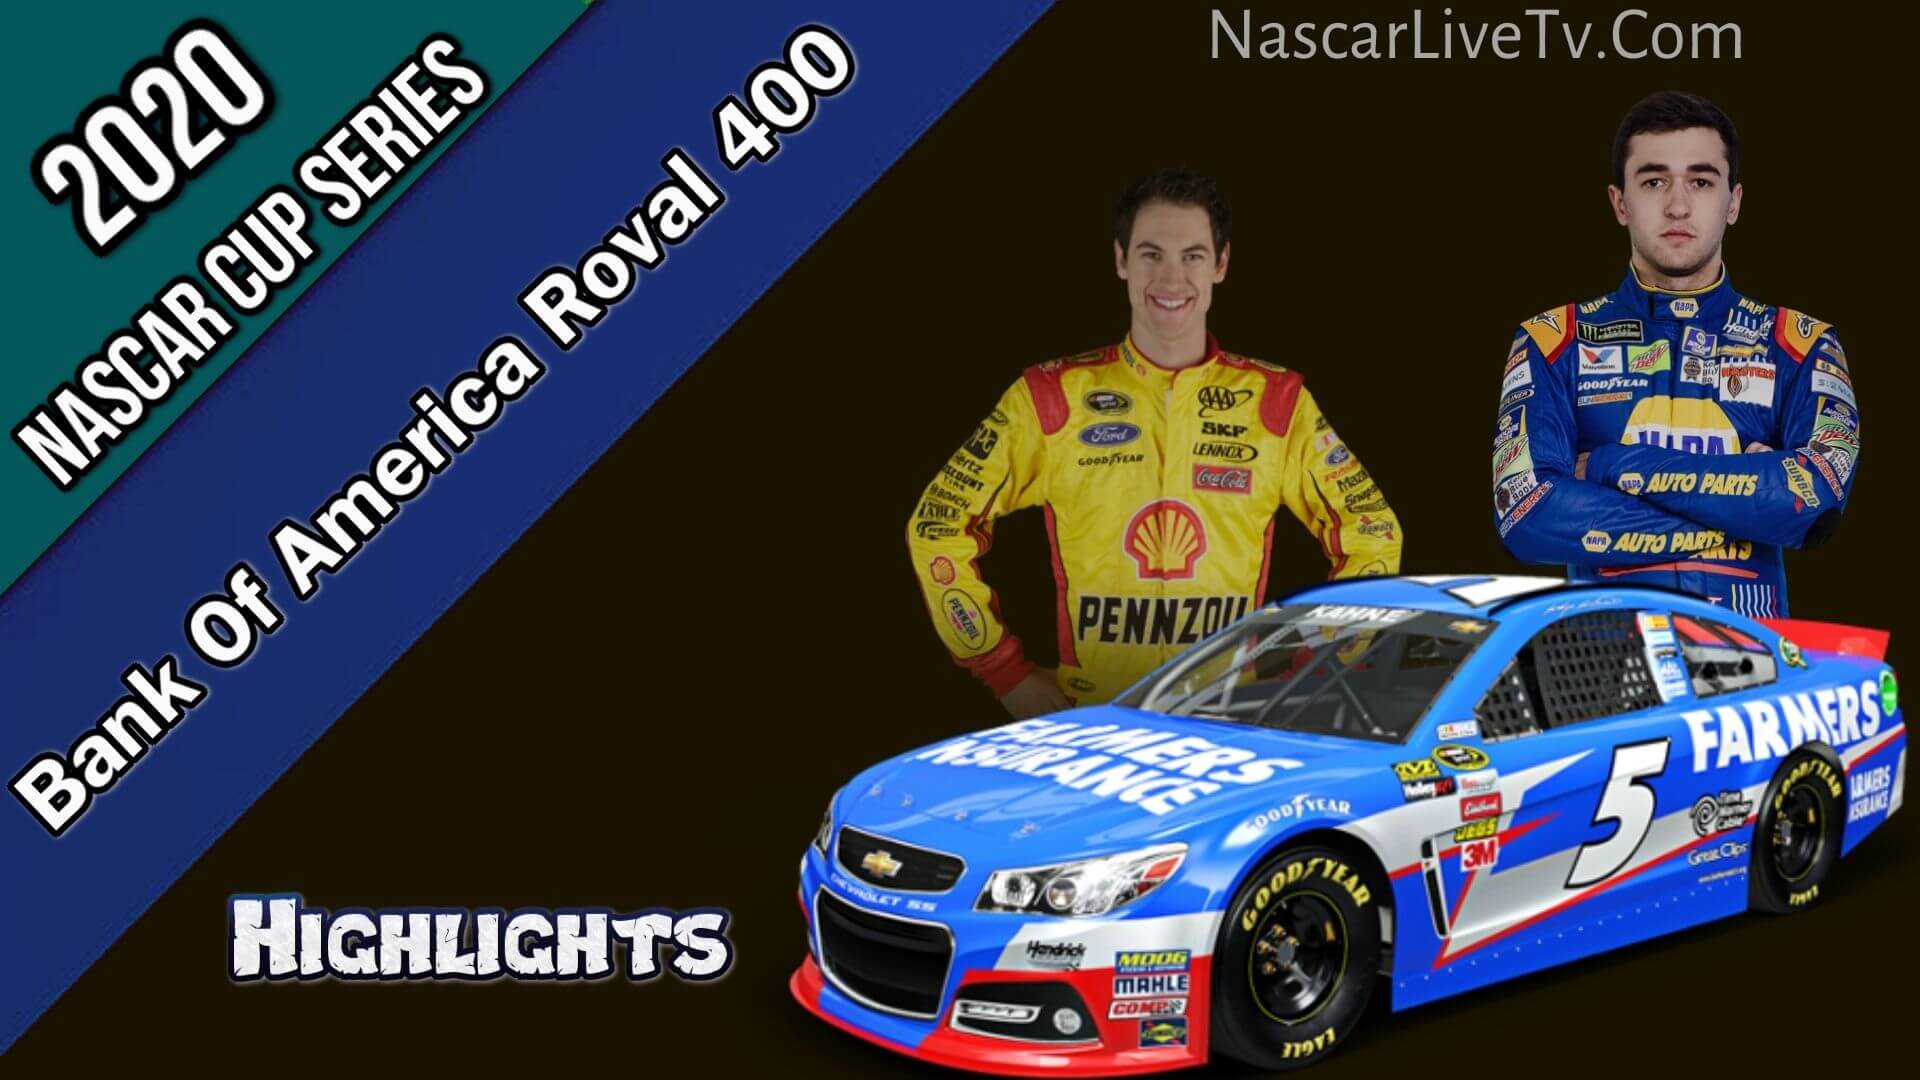 Bank Of America Roval 400 Nascar Cup Series 2020 Highlights